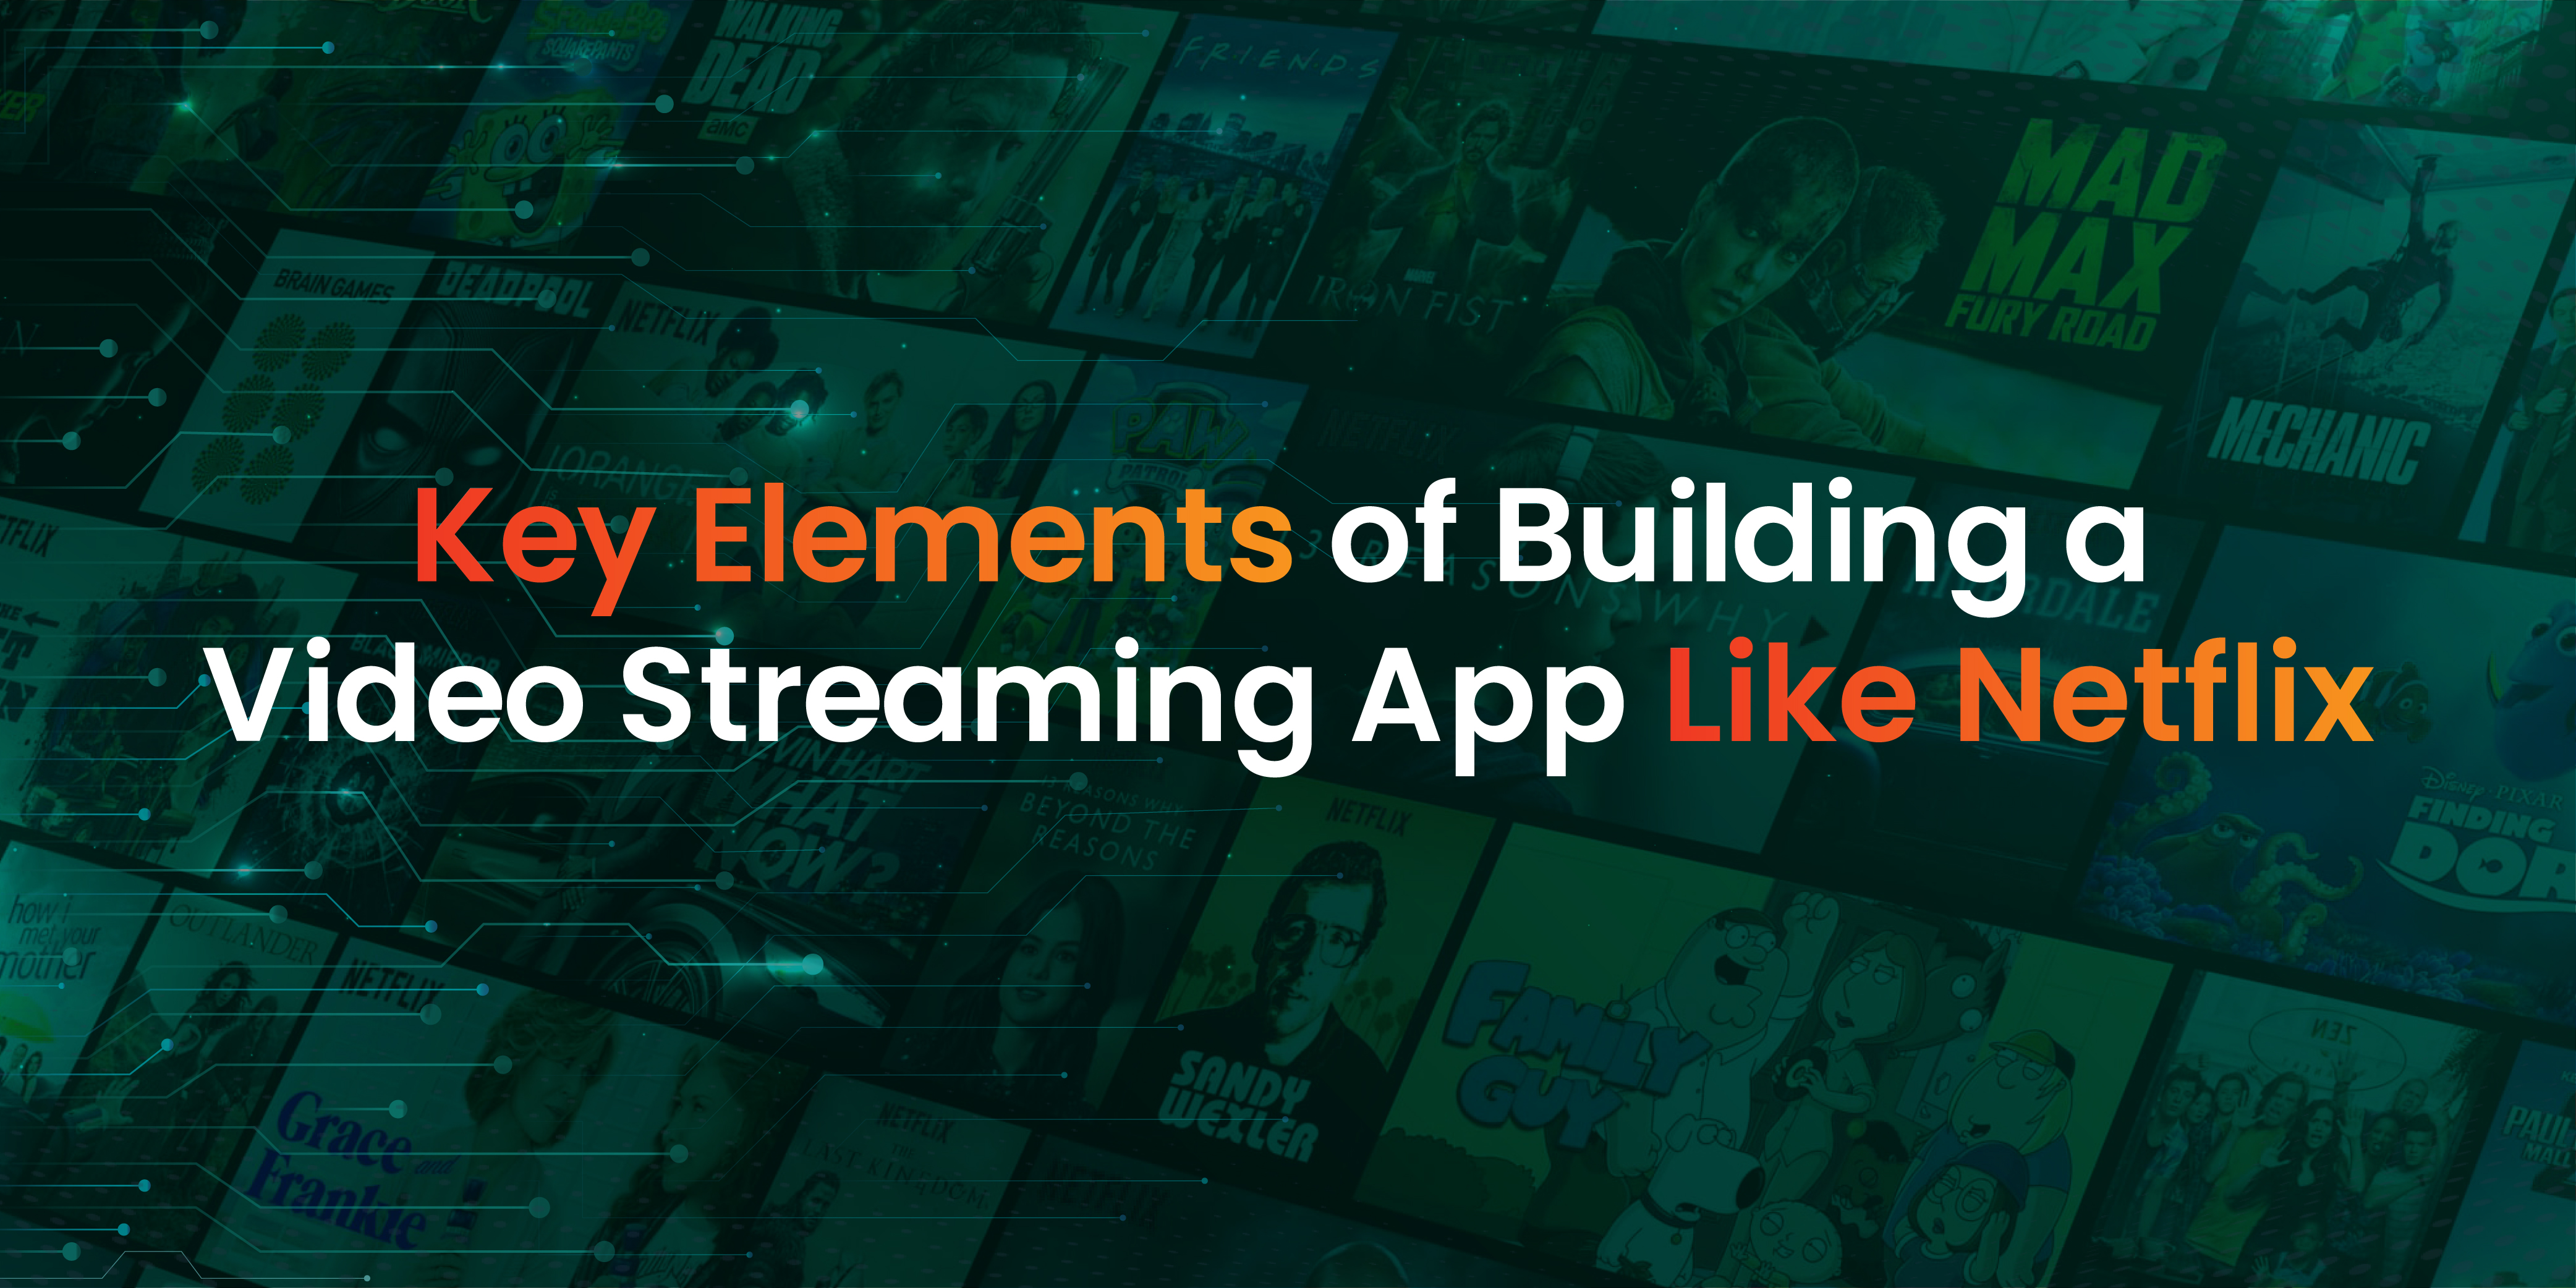 Key Elements of Building a Video Streaming App Like Netflix